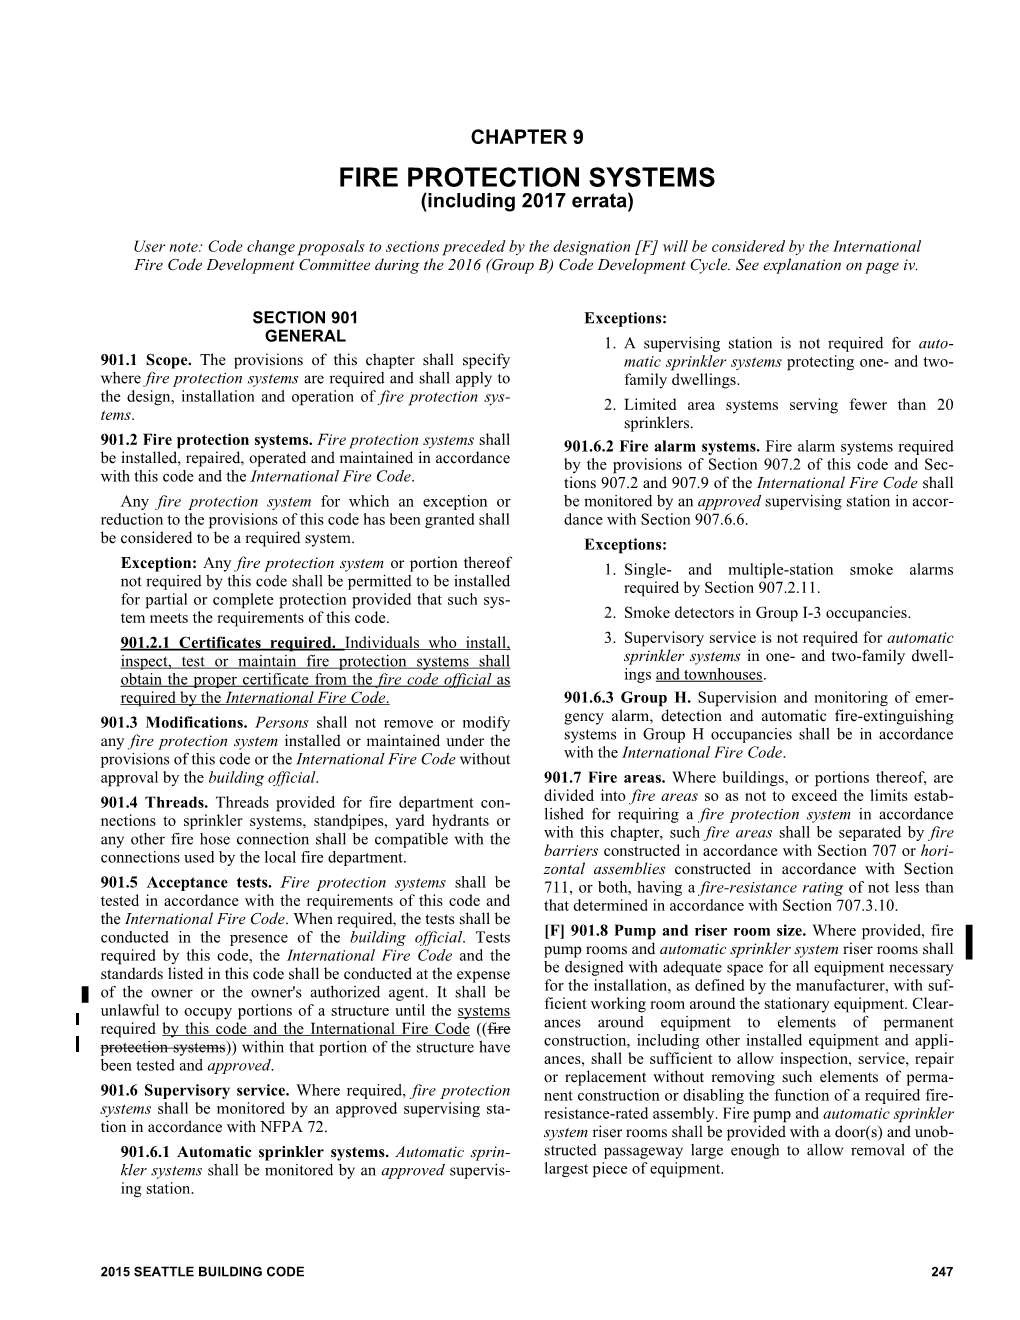 Seattle Building Code, Chapter 9, Fire Protection Systems